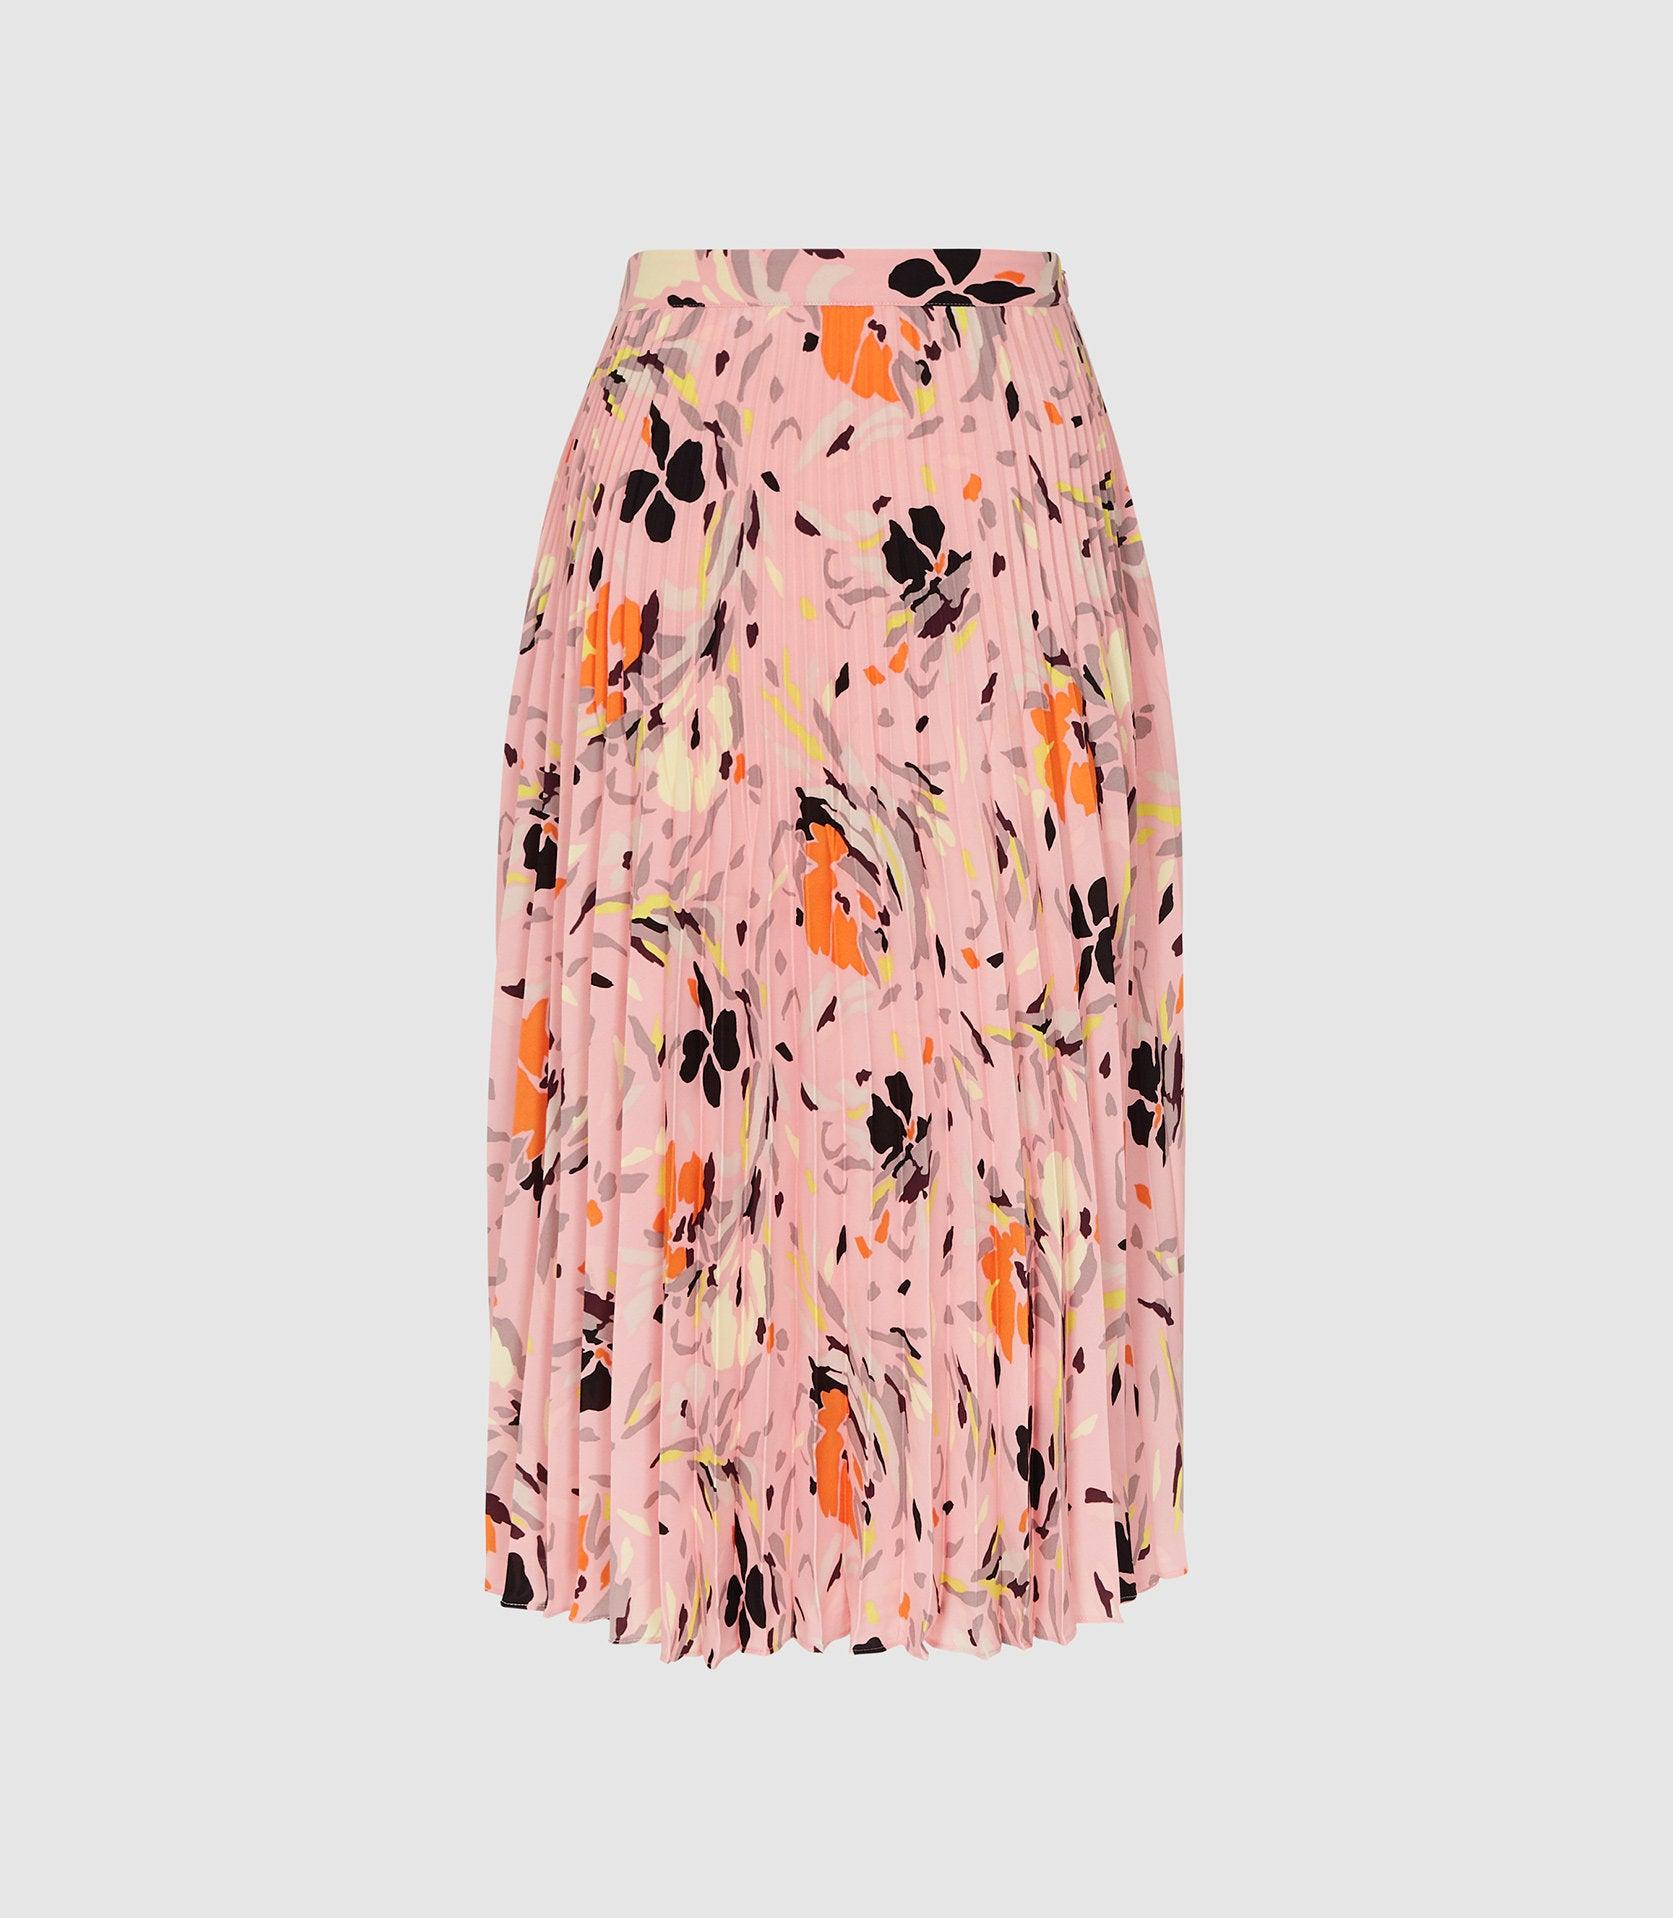 Reiss Silk Floral Pleated Midi Skirt in Pink - Save 29% - Lyst